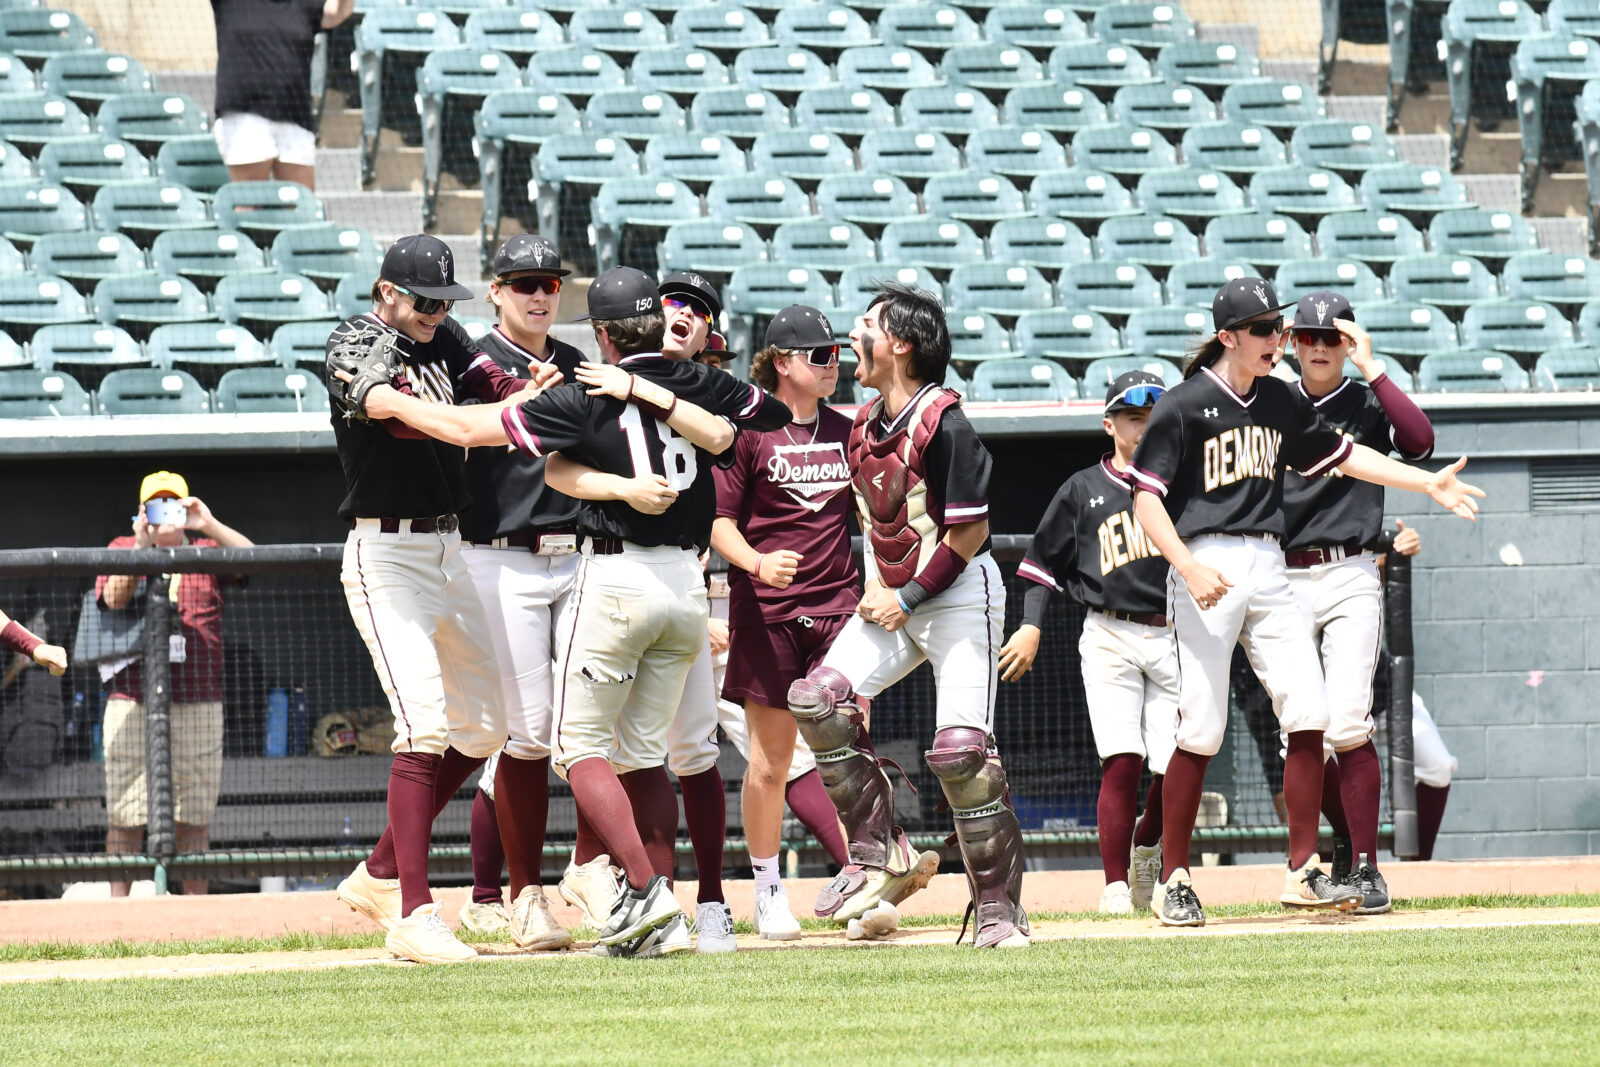 Golden stuns No. 1 Holy Family to reach 4A baseball title game